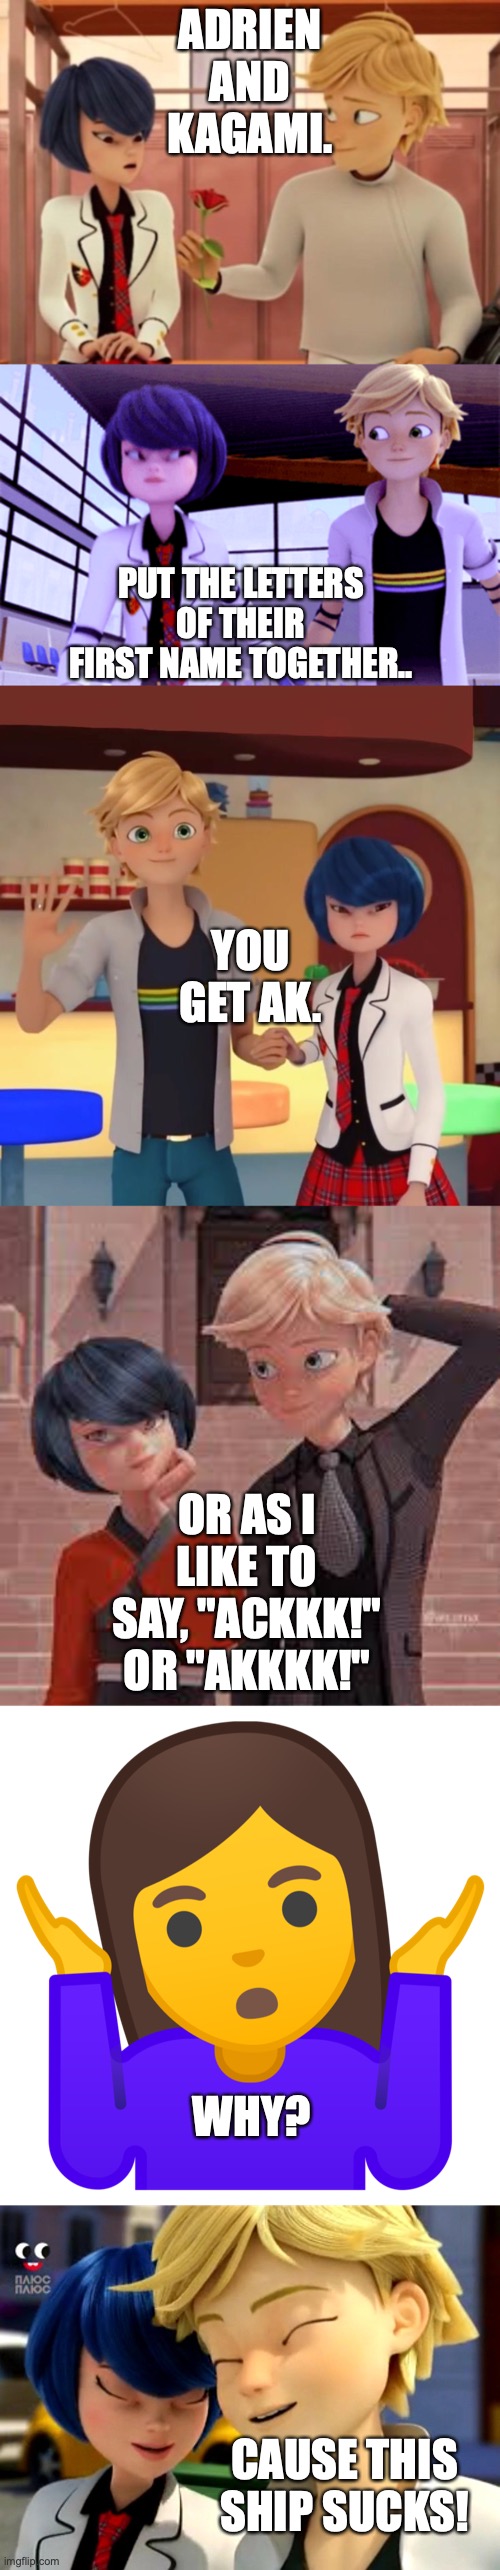 ADRIGAMI SUCKS! | ADRIEN AND KAGAMI. PUT THE LETTERS OF THEIR FIRST NAME TOGETHER.. YOU GET AK. OR AS I LIKE TO SAY, "ACKKK!" OR "AKKKK!"; WHY? CAUSE THIS SHIP SUCKS! | image tagged in miraculous ladybug,sucks,angry | made w/ Imgflip meme maker